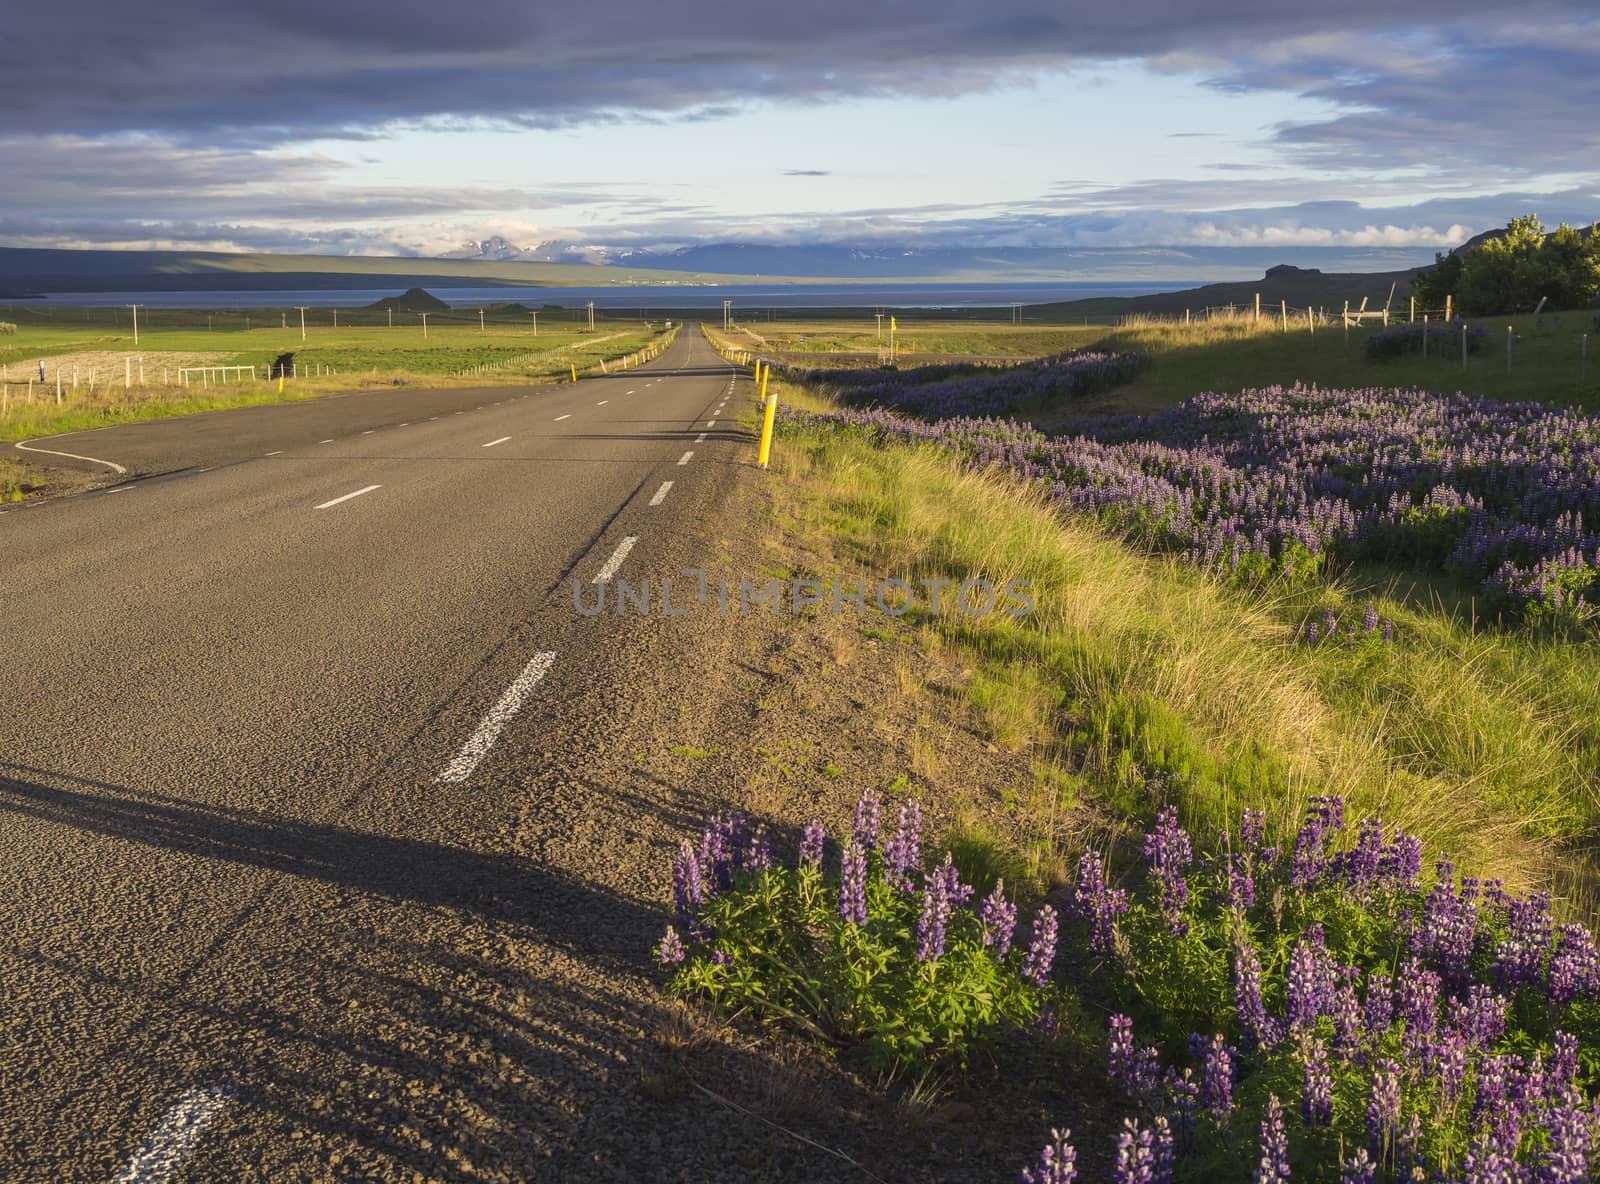 Asphalt road curve to the sea shore coast through rural northern landscape with green grass and purple lupine (Lupinus perennis) flowers, sunset dramatic sky clouds, west Iceland, copy space